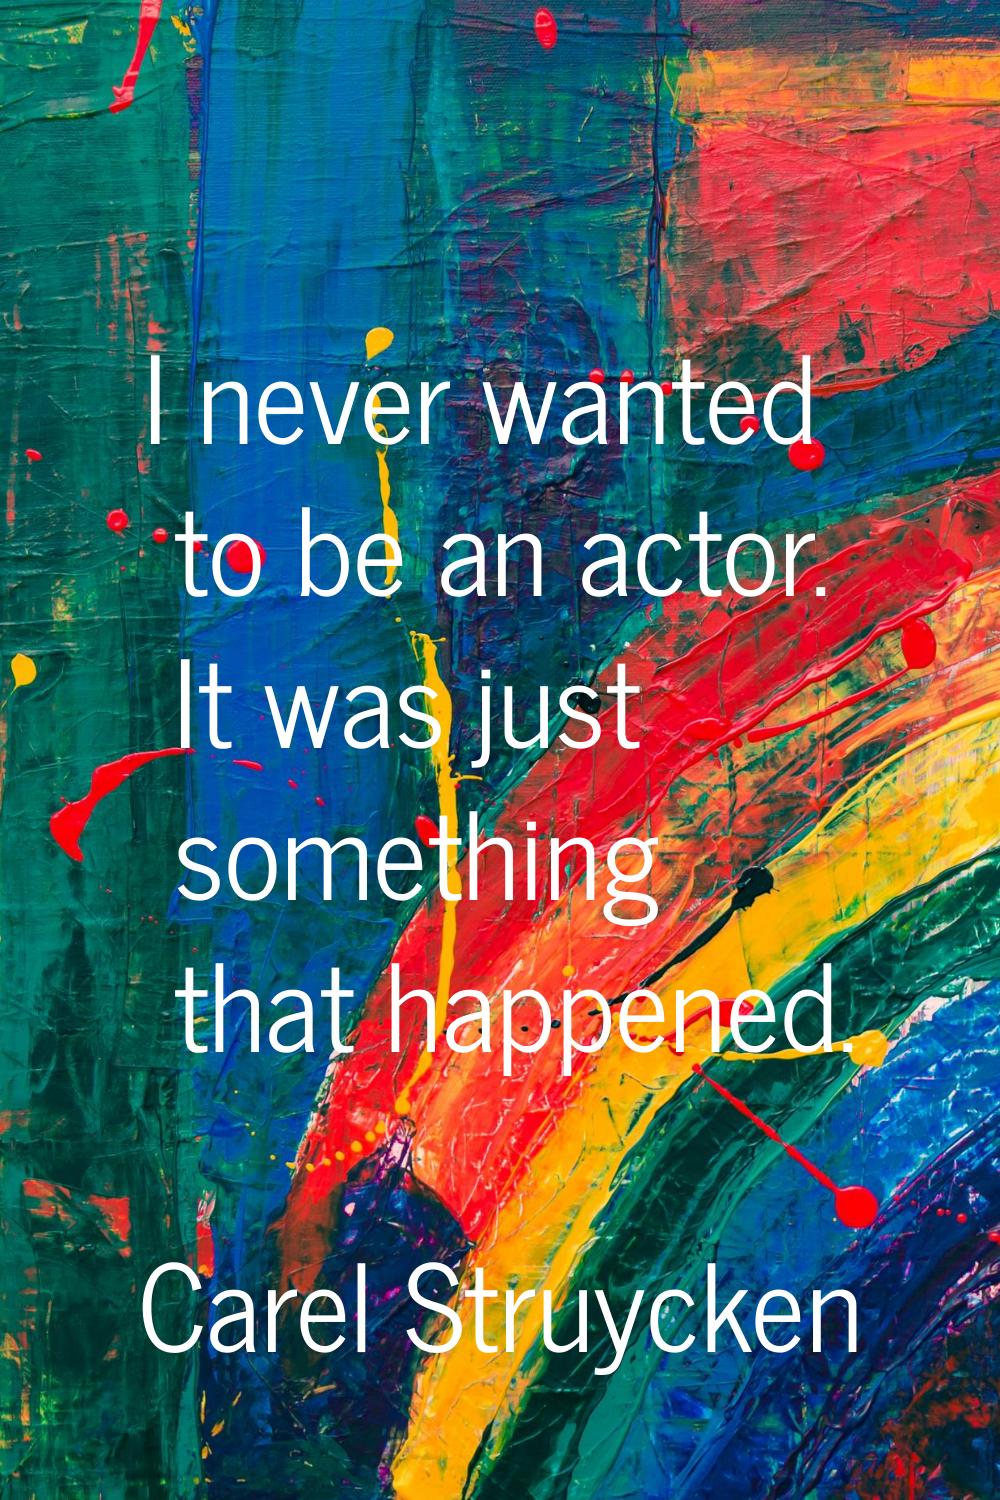 I never wanted to be an actor. It was just something that happened.